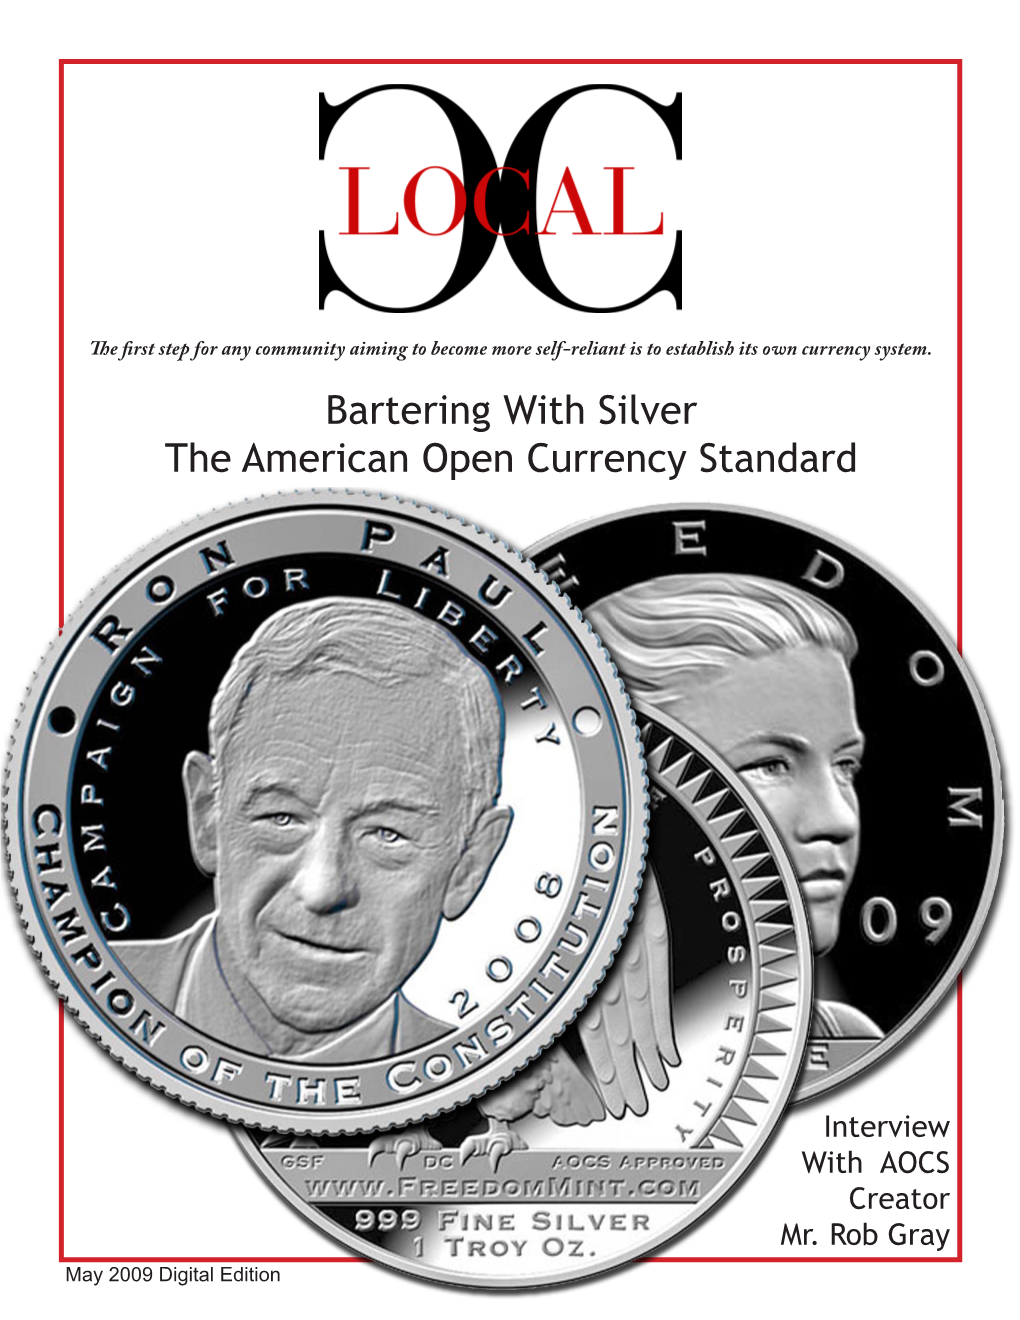 Bartering with Silver the American Open Currency Standard